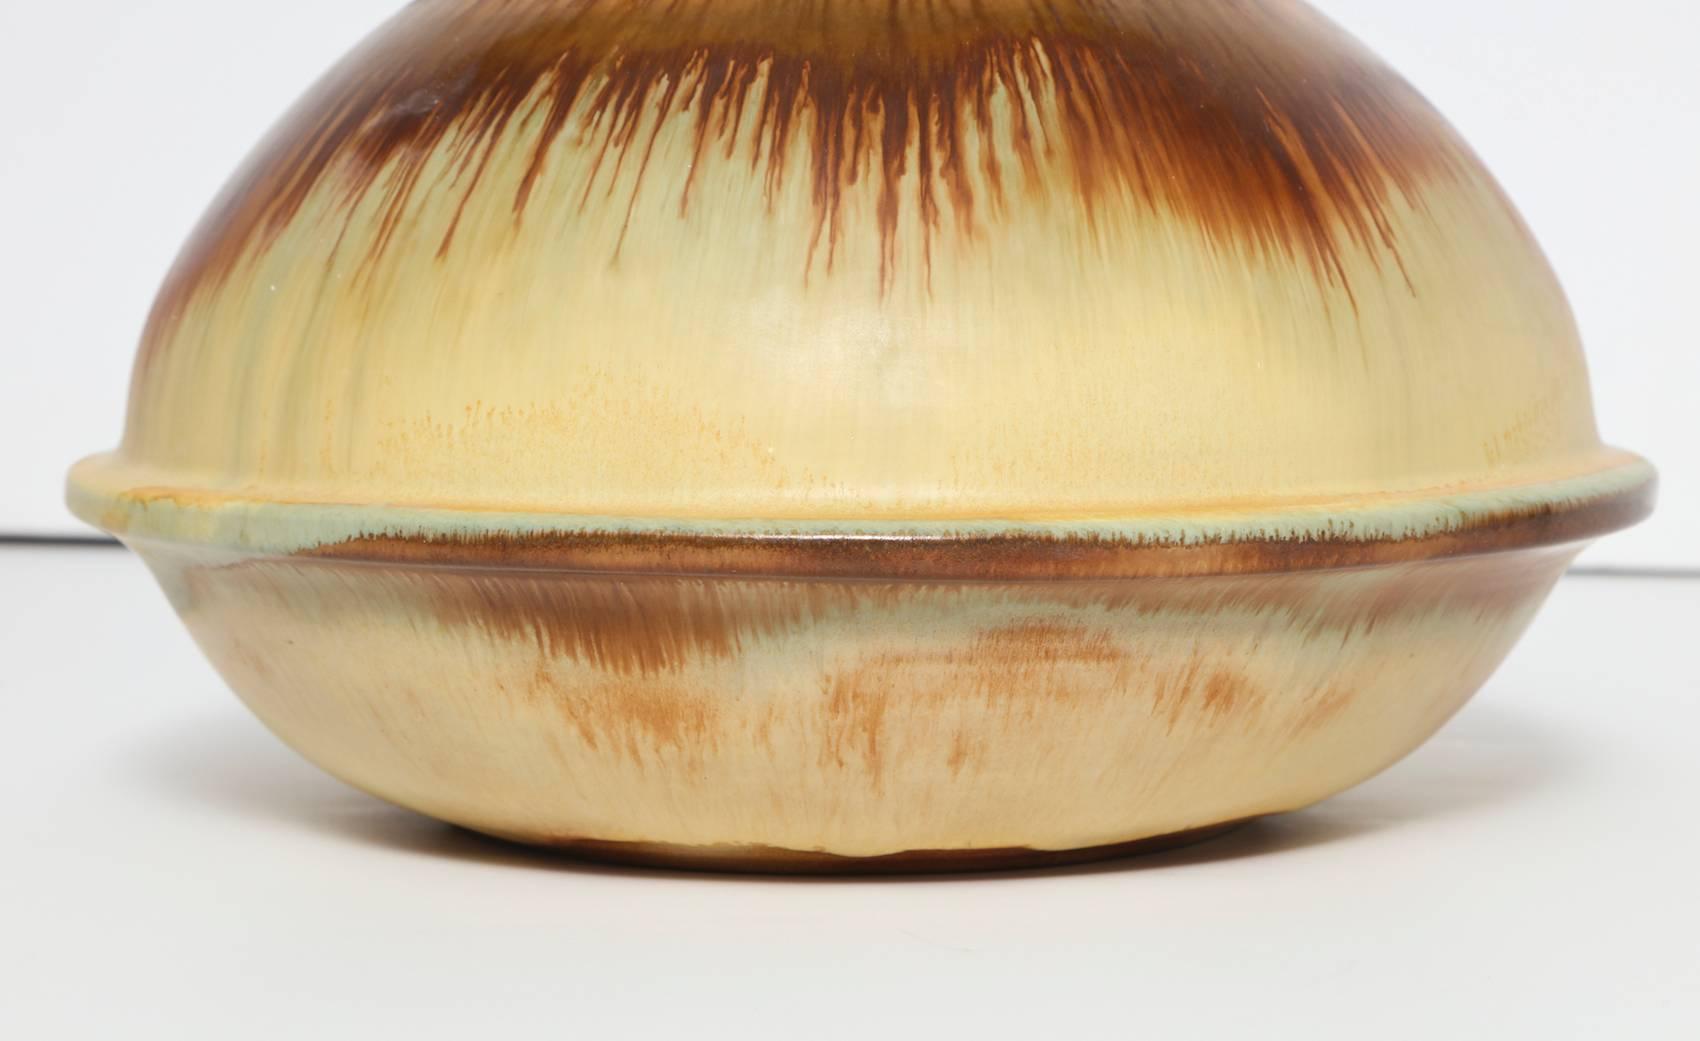 Jana Merlo studio-made earthenware vase. Great wide-body bottle form with relief waist and spout opening at top. Glazed in tans and rust colors. Signed on underside.